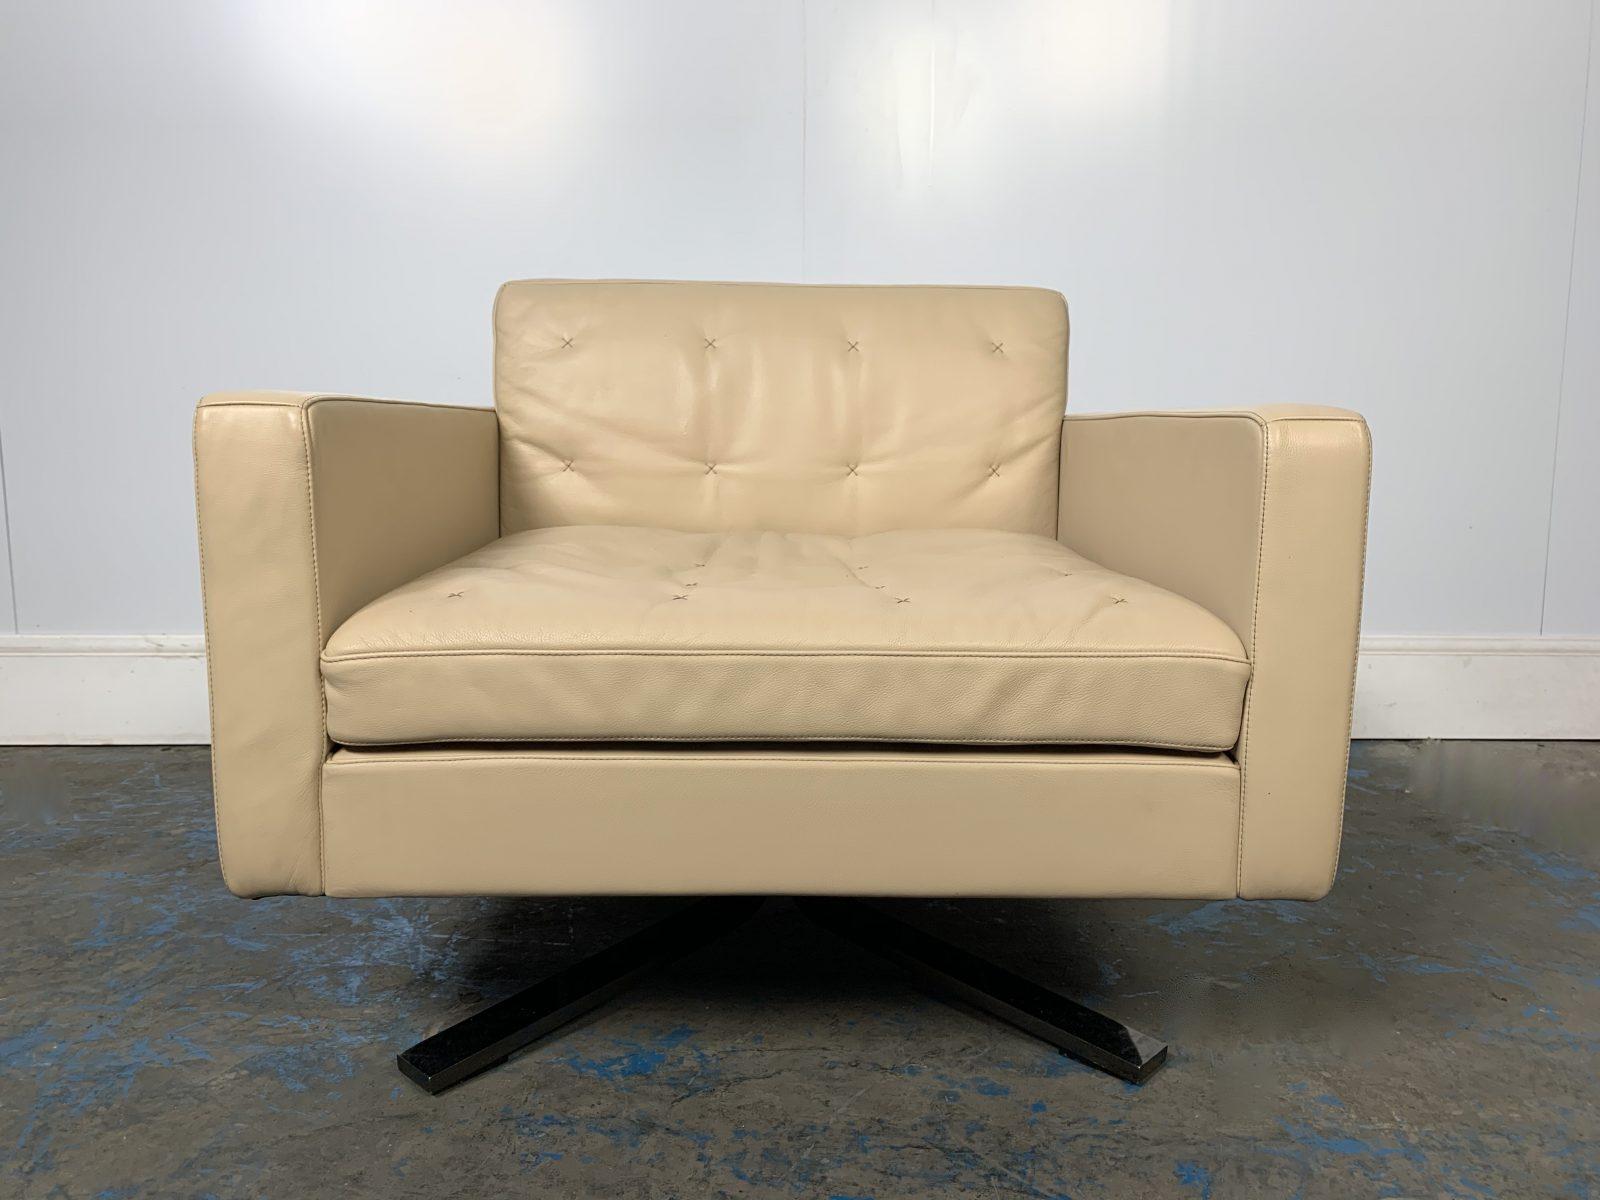 Unique Pair of Special-Order Poltrona Frau for Ferrari “Kennedee” Armchairs in In Good Condition For Sale In Barrowford, GB